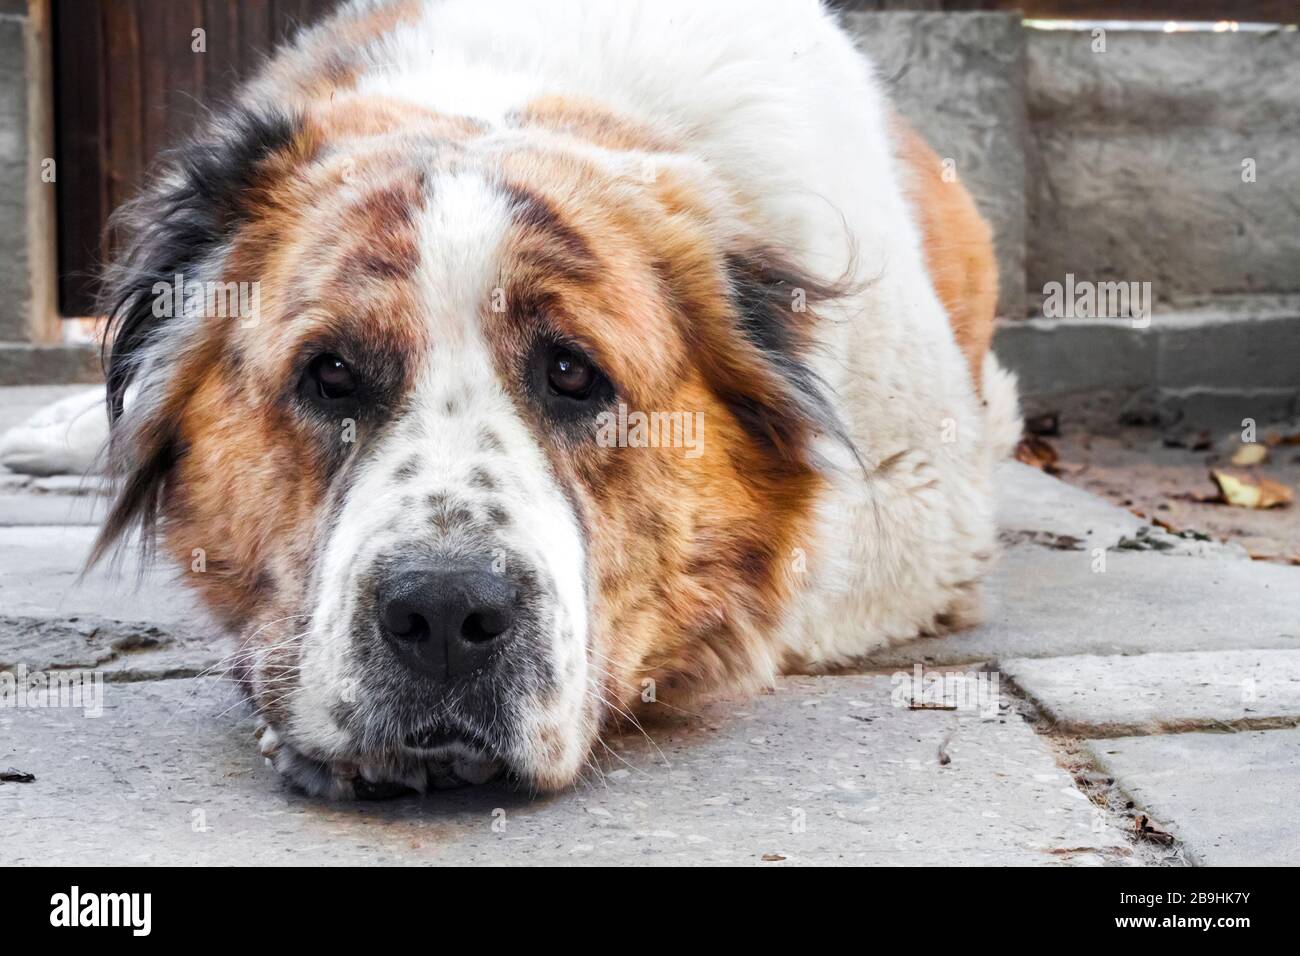 Portrait of a pensive dog resting its head on its paws. Breed Central Asian Shepherd (Alabai) Stock Photo